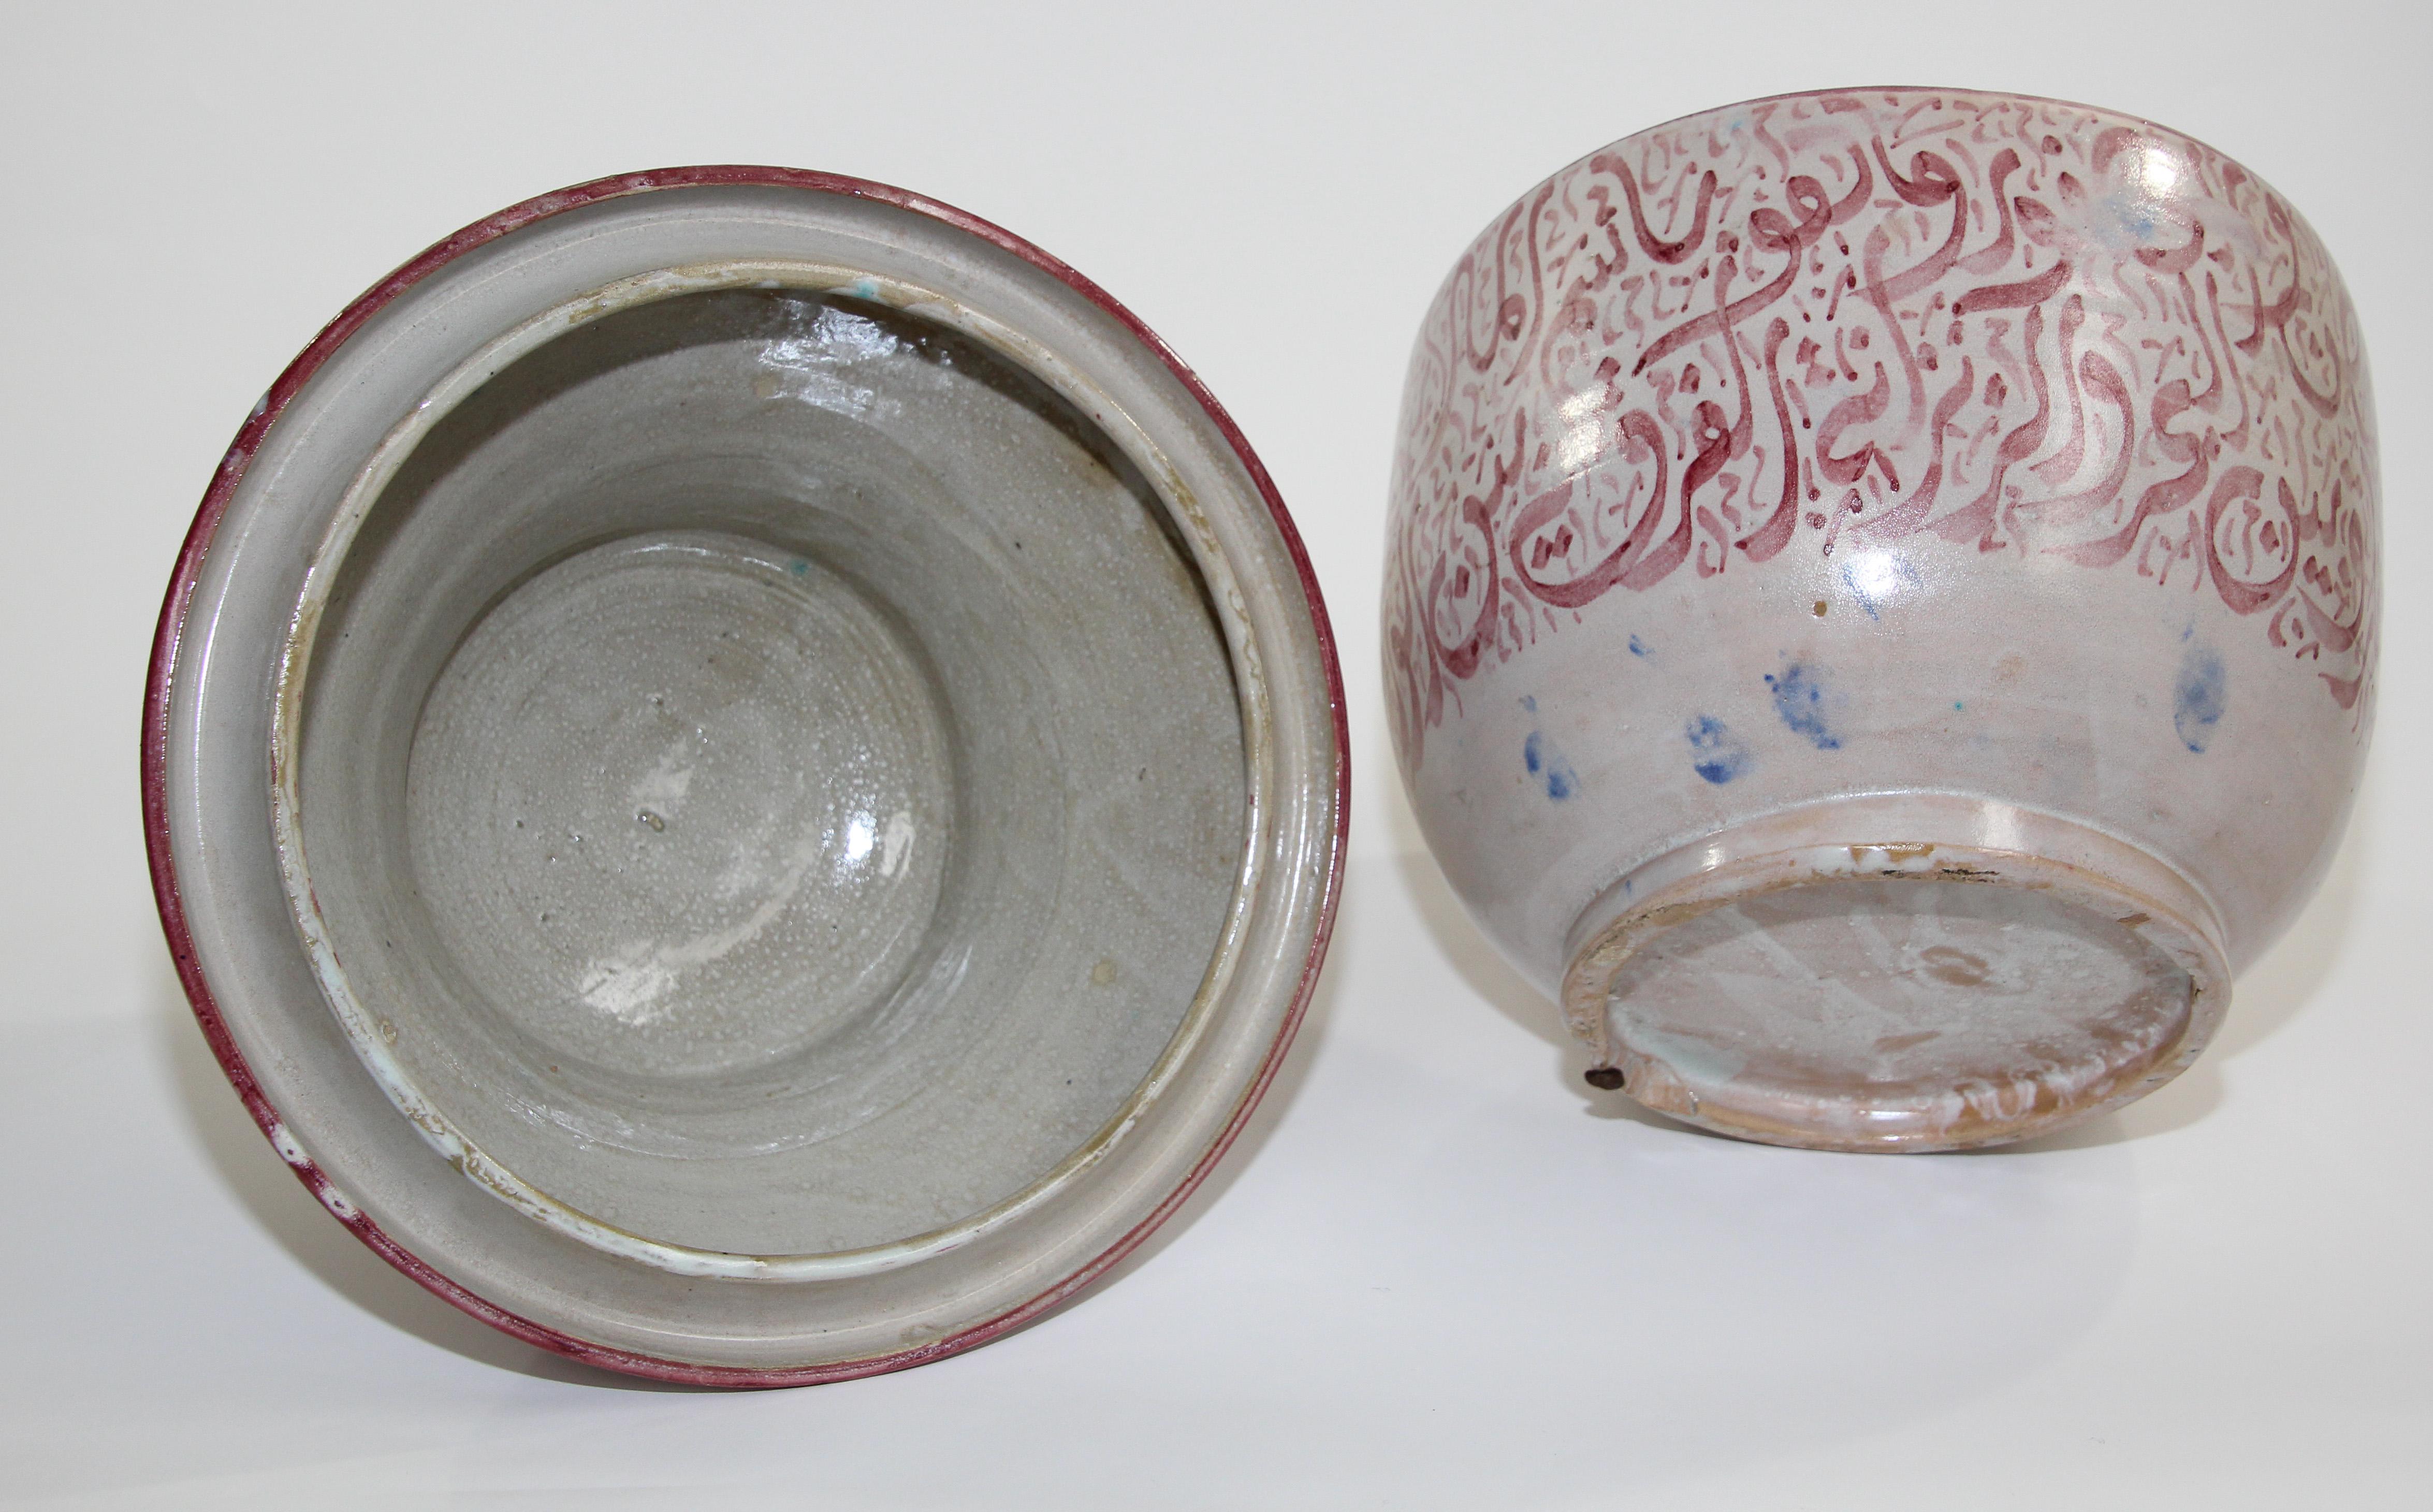 Moroccan Ceramic Lidded Urn from Fez with Arabic Calligraphy Pink Writing For Sale 9